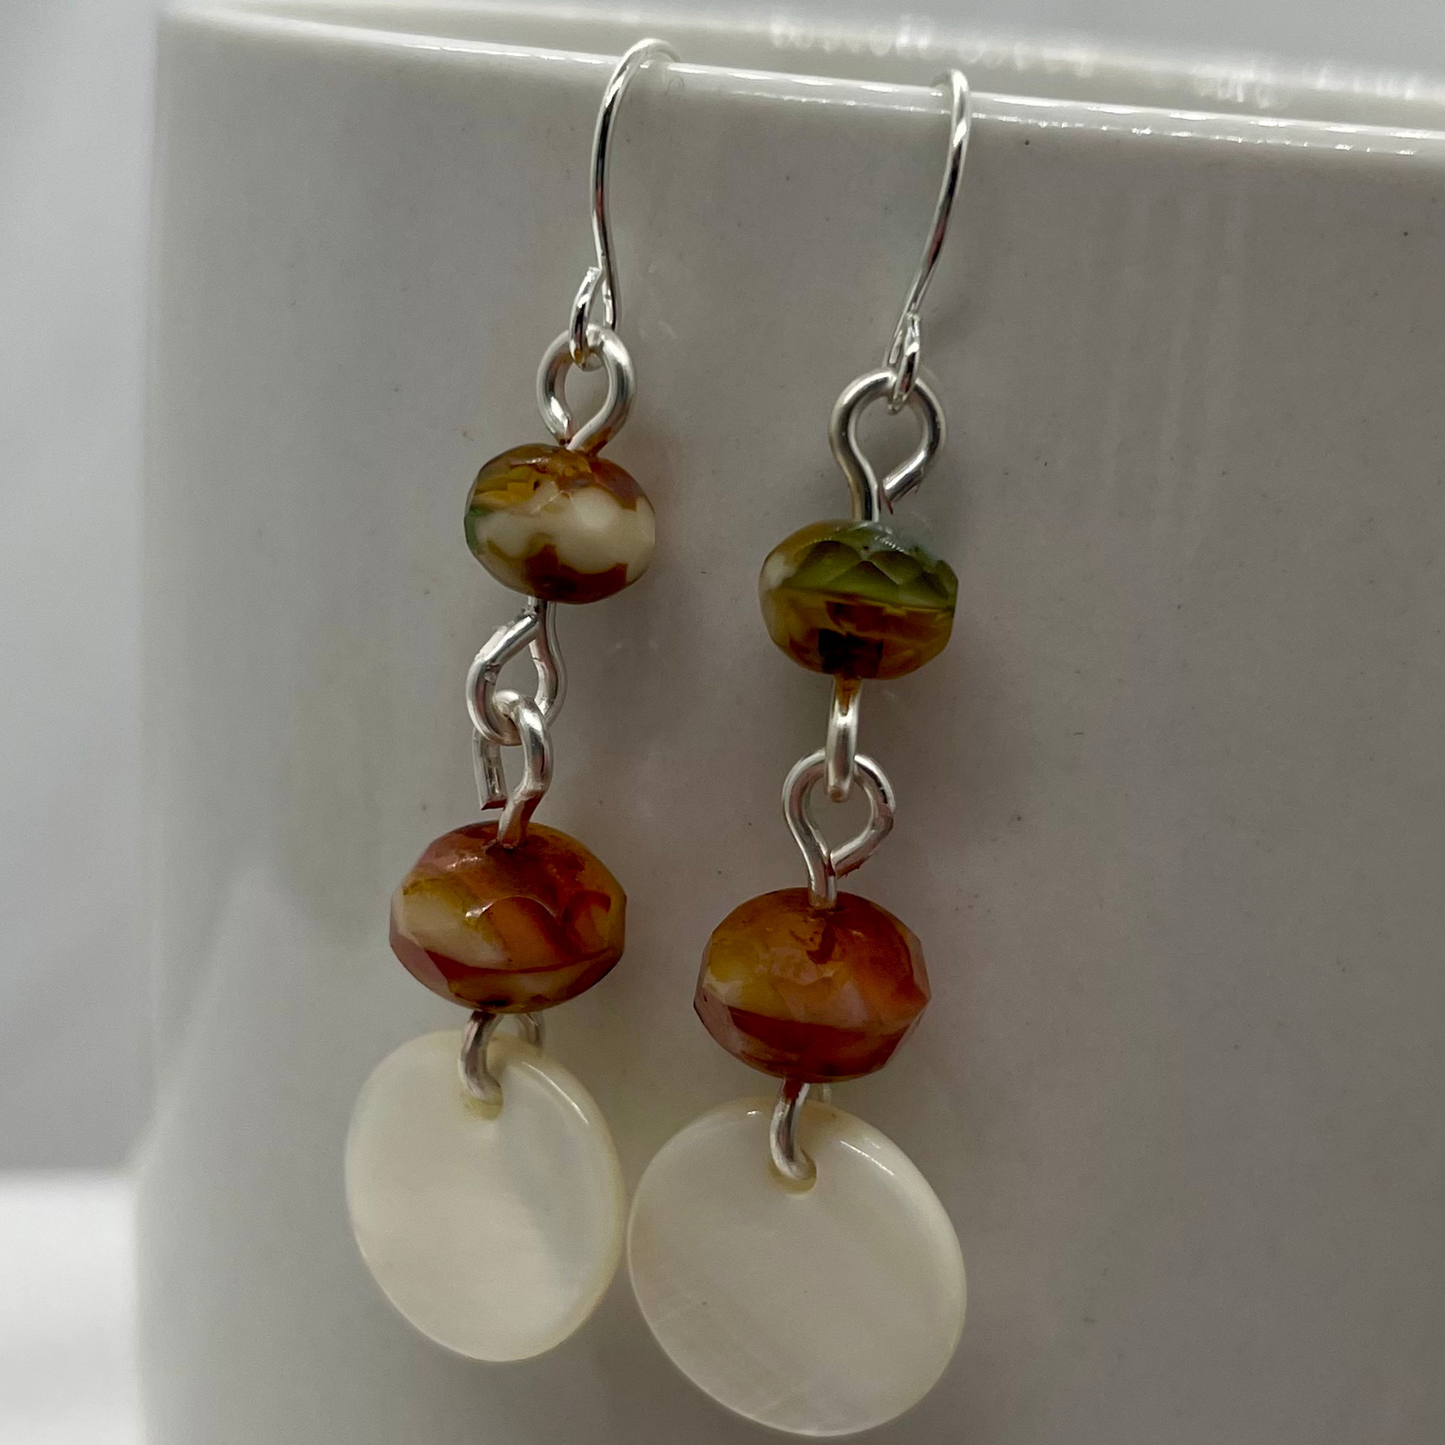 Boho Harmony: Czech fire-polished Picasso Beads and Mother of Pearl Drop Earrings | gift idea | summer fun | one of a kind | artisan crafted